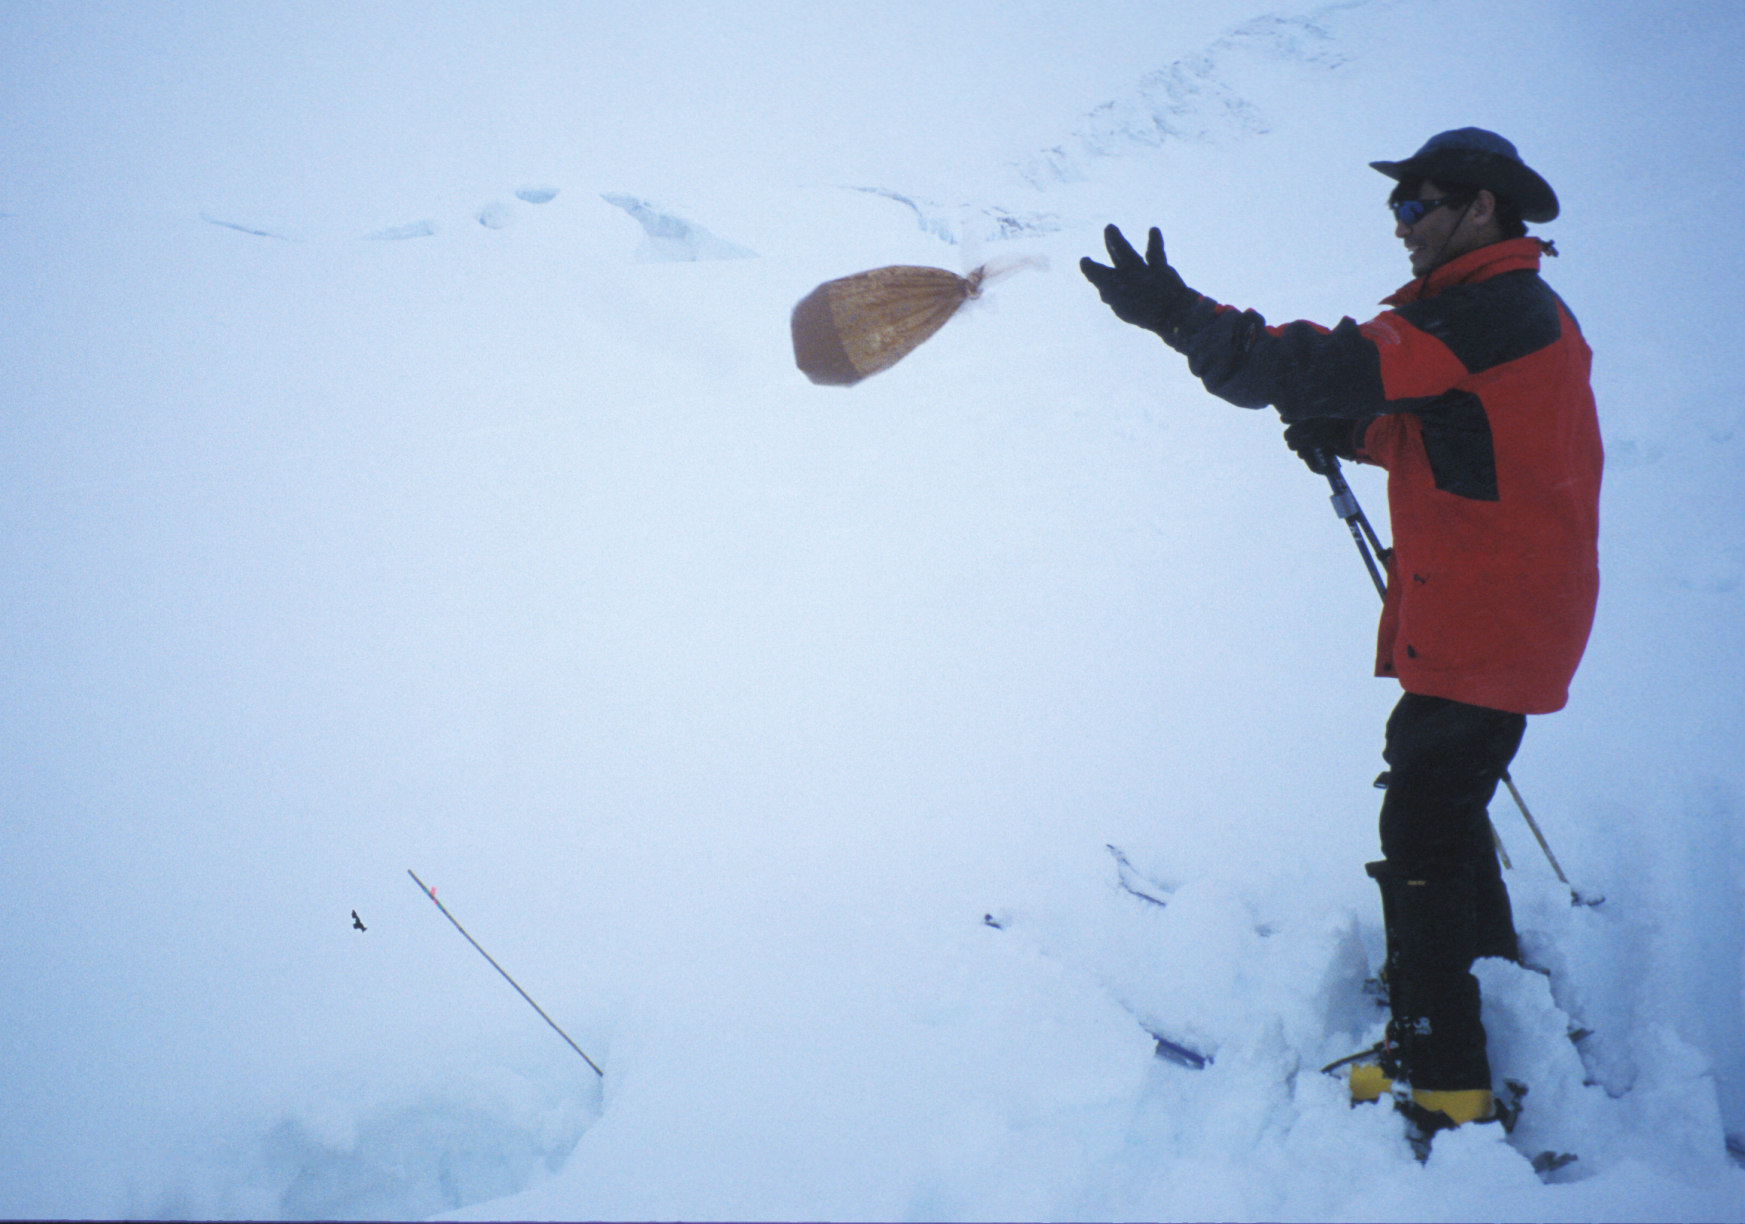 Photo by Ned Rozell. Tohru Saito of UAF’s International Arctic Research Center disposes of a bag of human waste into a crevasse on Kahiltna Glacier during a 2003 climb up Denali’s West Buttress route.